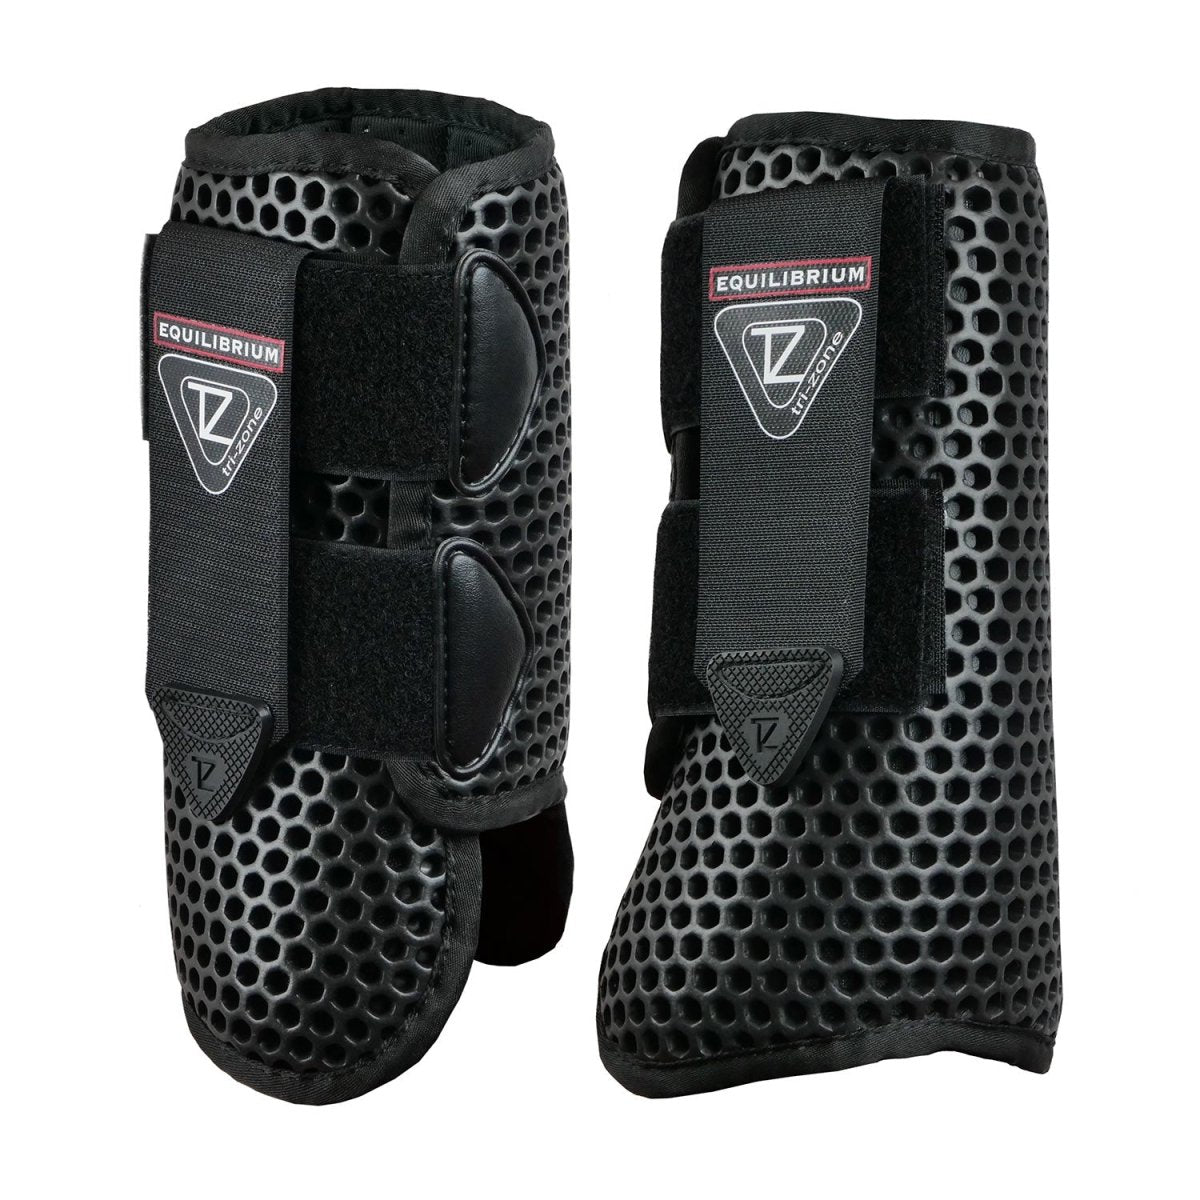 Equilibrium Tri-Zone All Sports Boots - Black - Extra Small